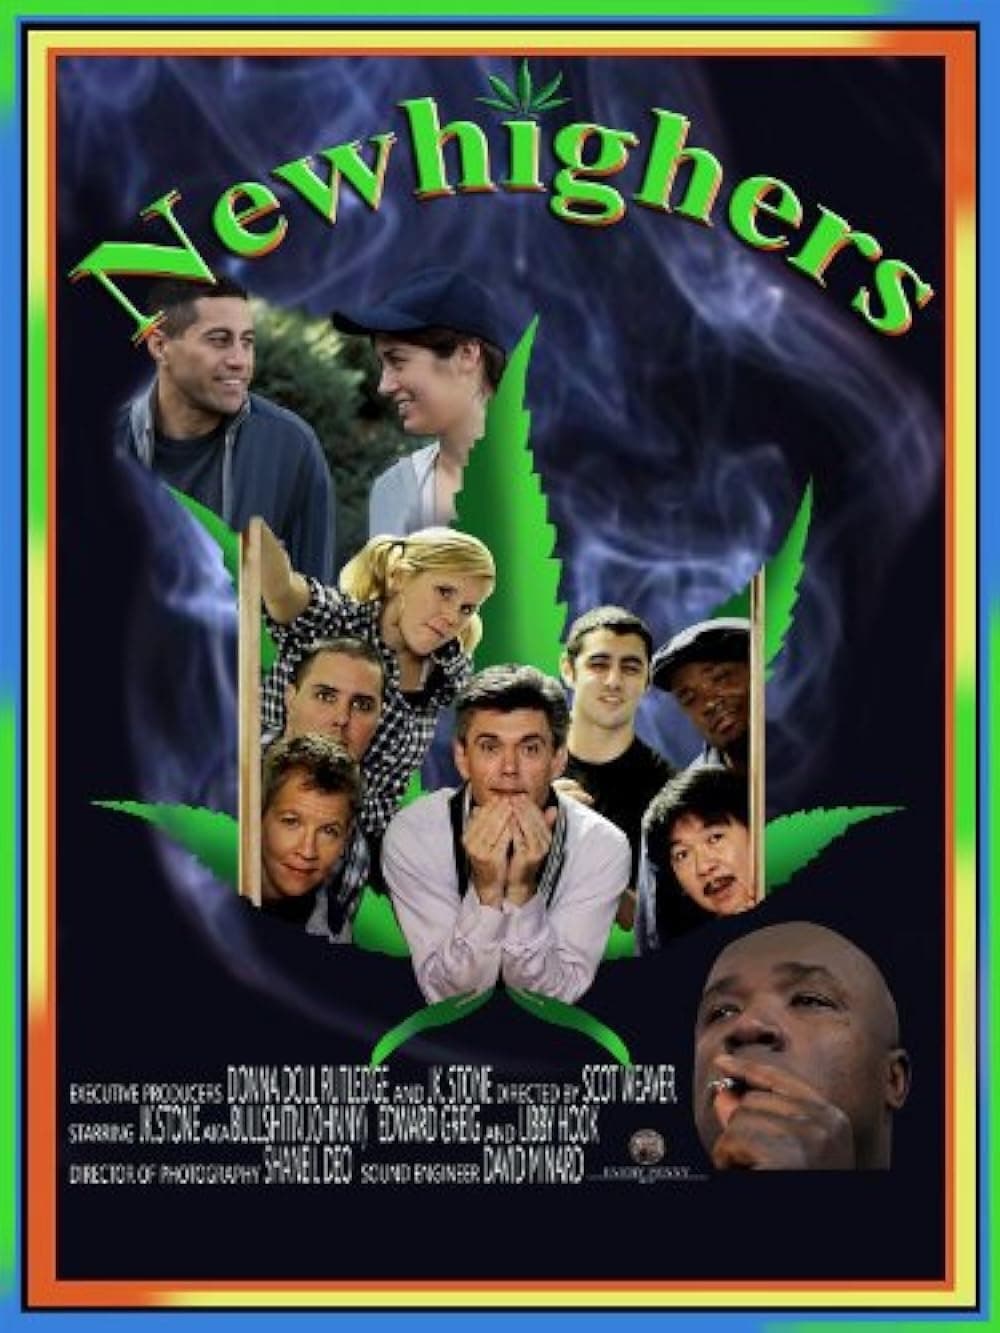 Newhighers